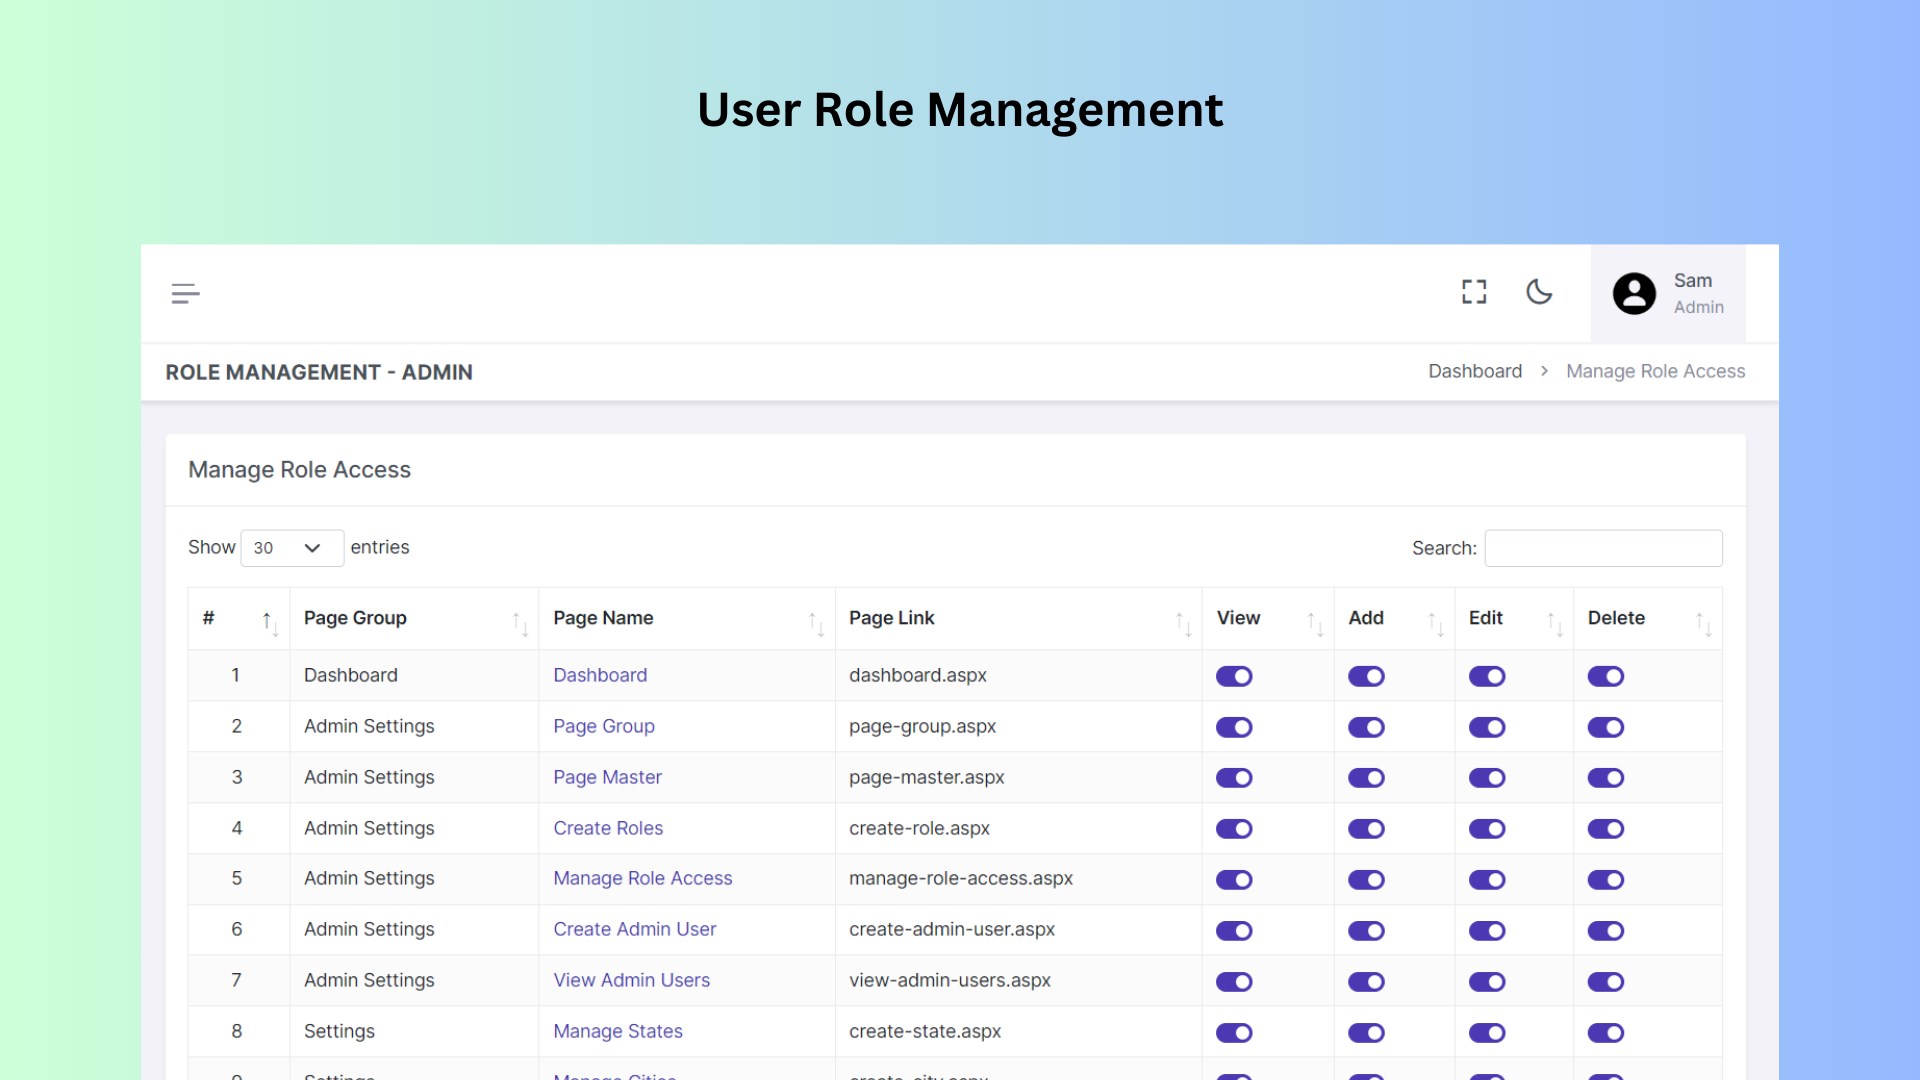 Implemented user role management functionality within the web application to efficiently assign and control access privileges based on user roles.